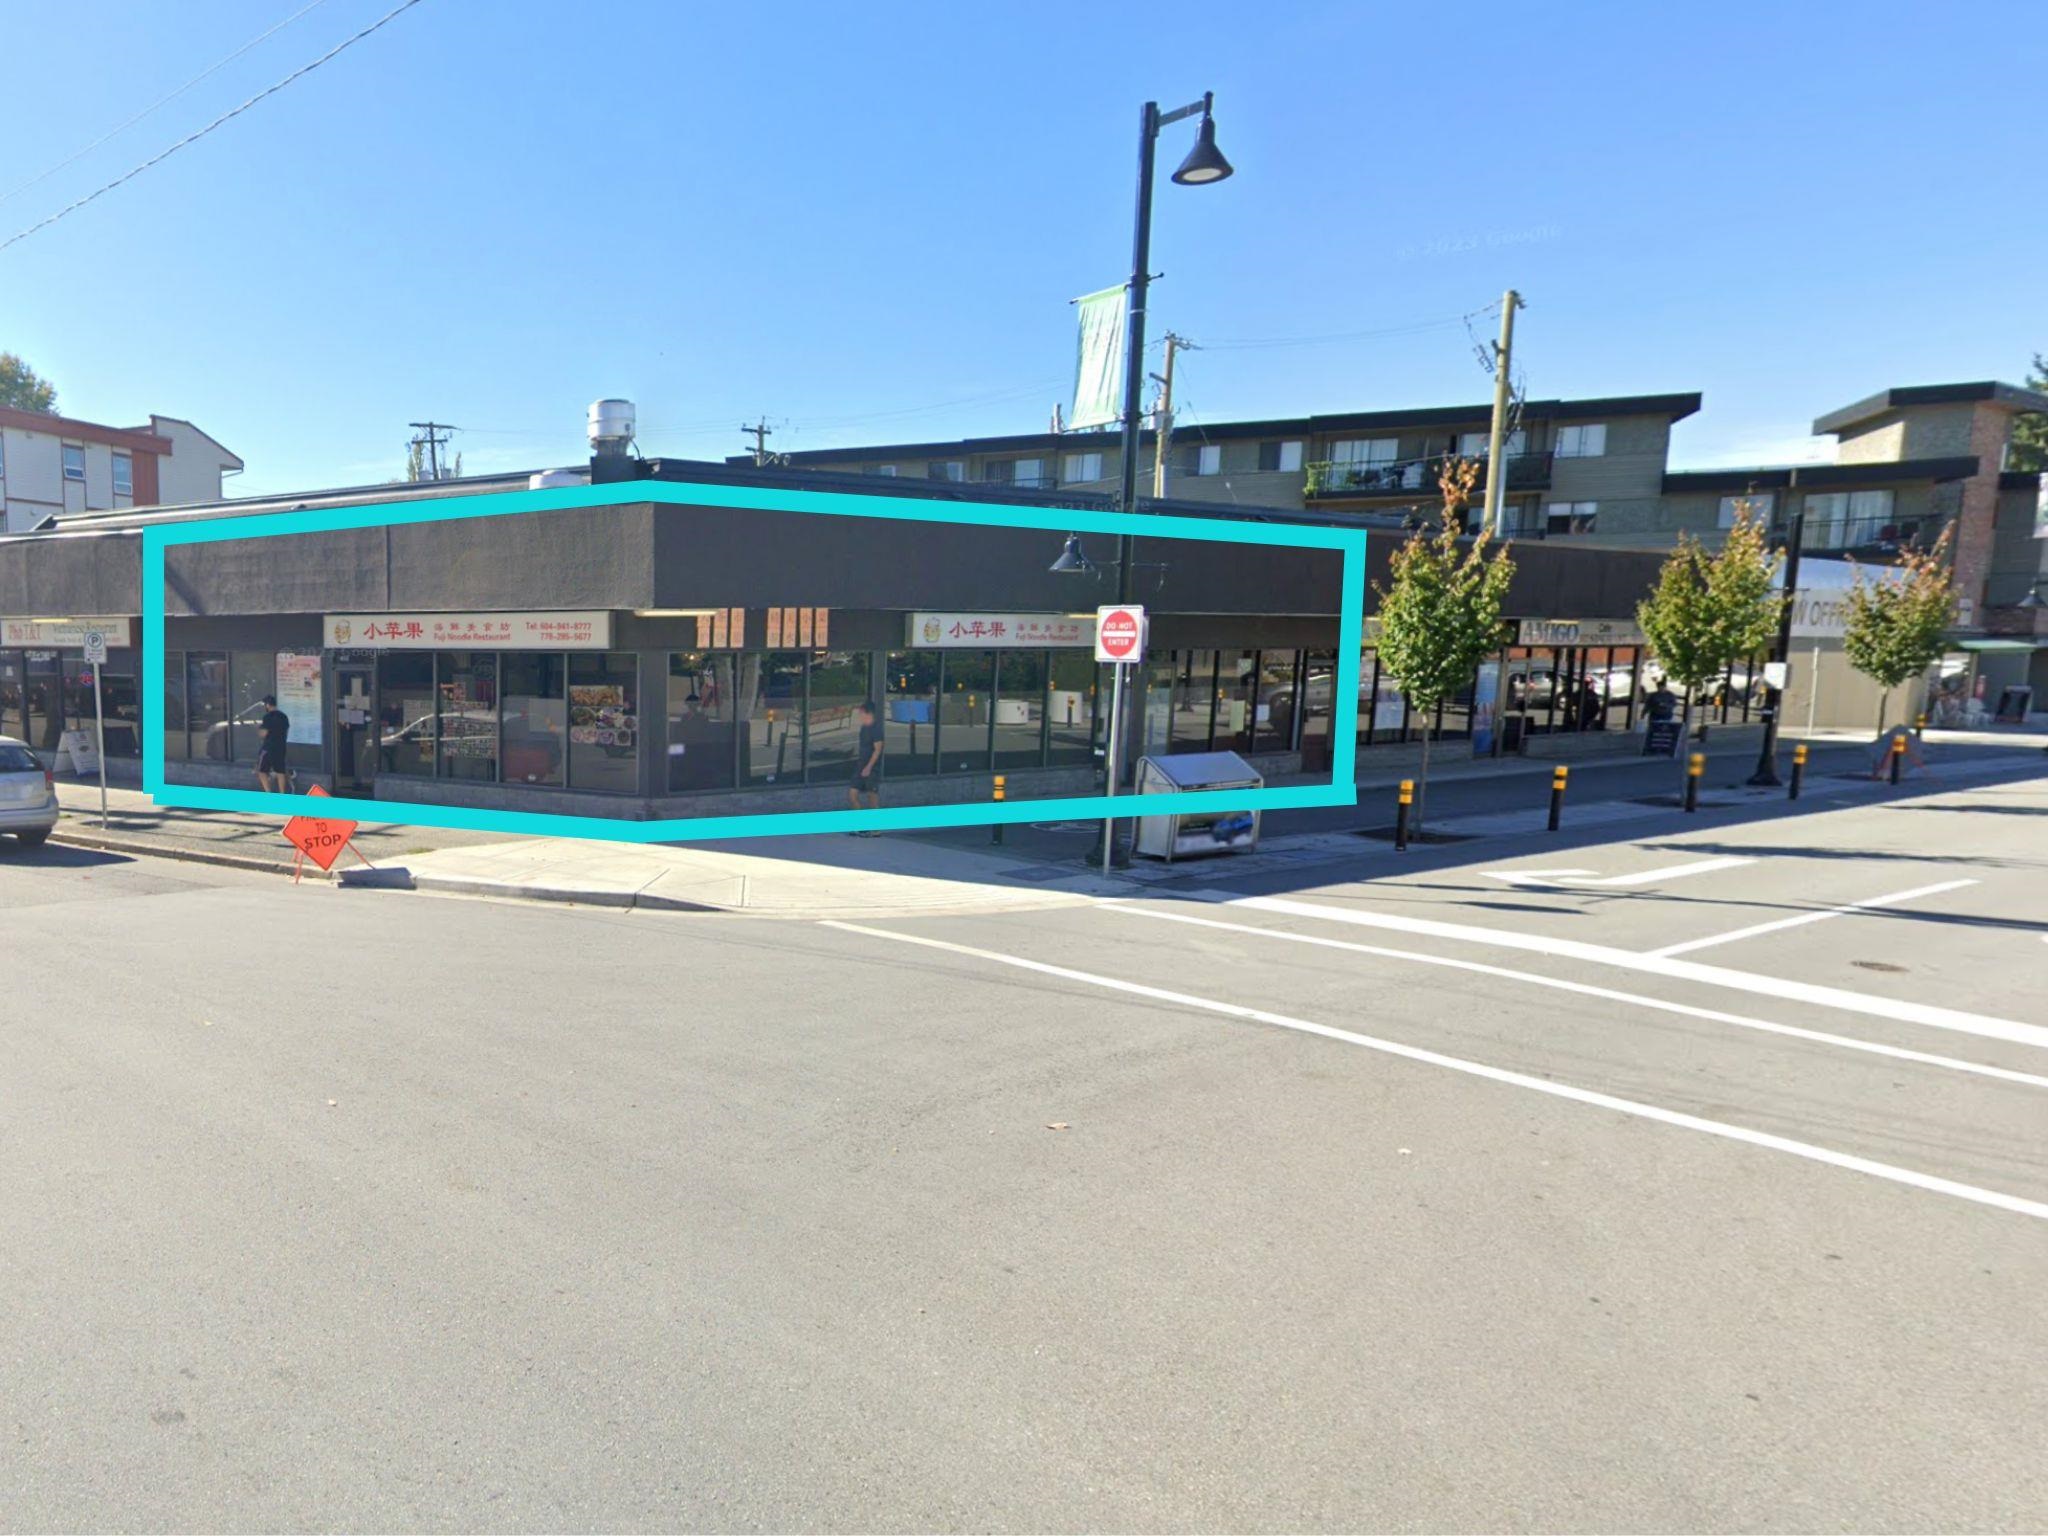 Central Pt Coquitlam Land Commercial for sale:    (Listed 6800-05-10)